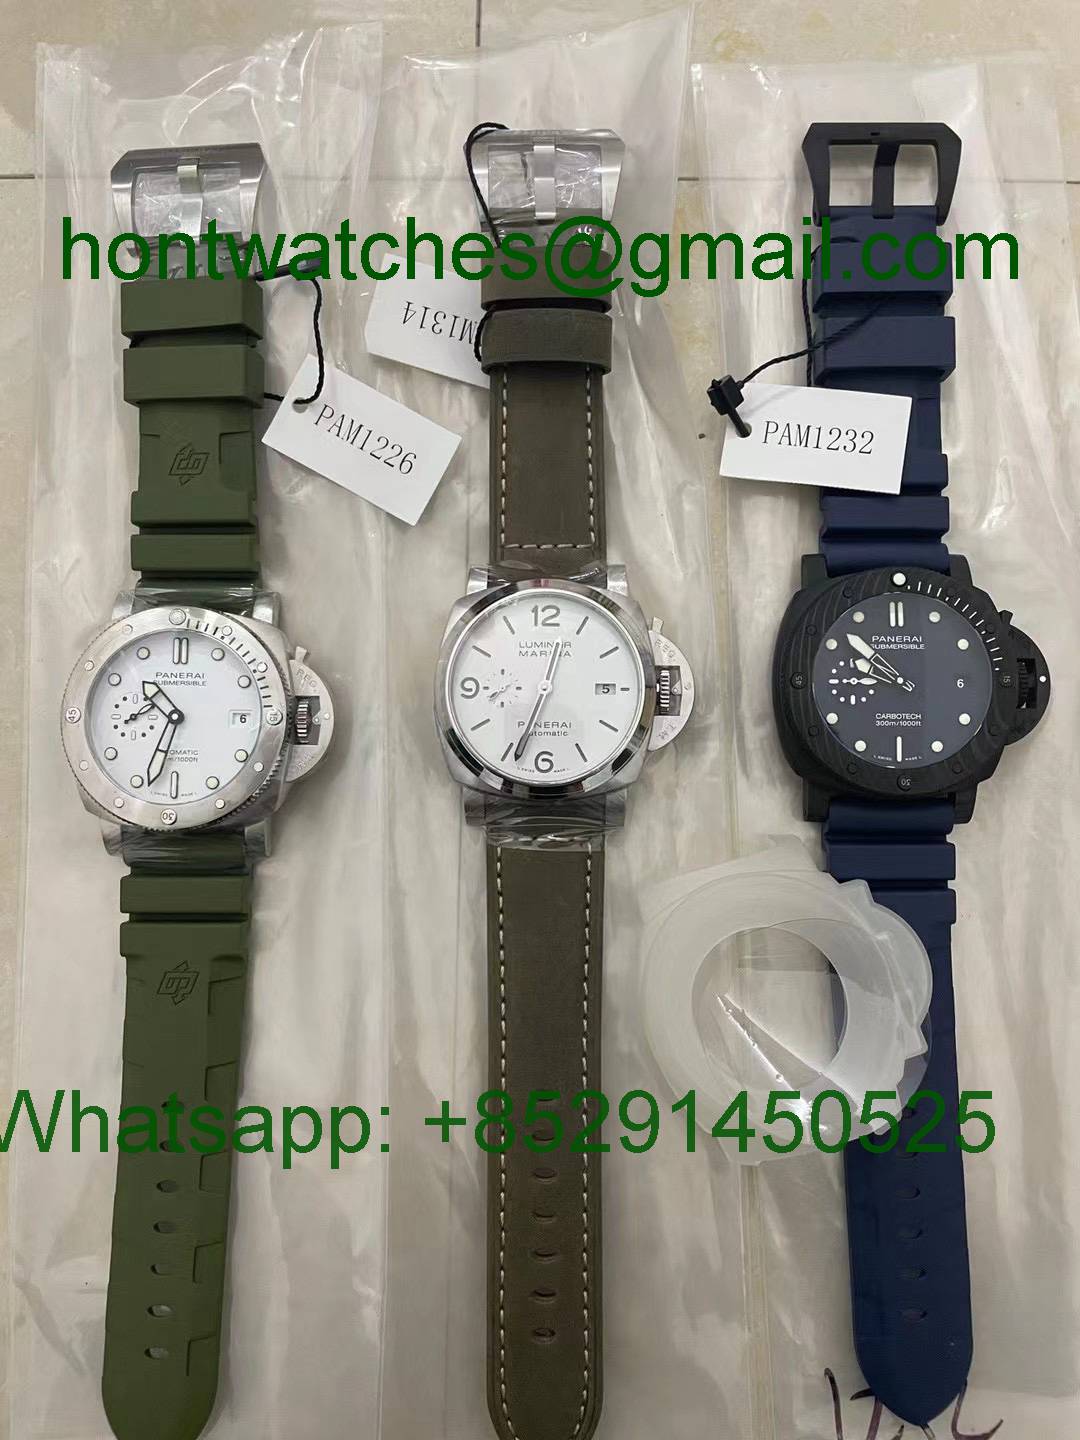 Replica Watches Wholesale Hontwatch Panerai PAM1226 VSF Watches Wholesale